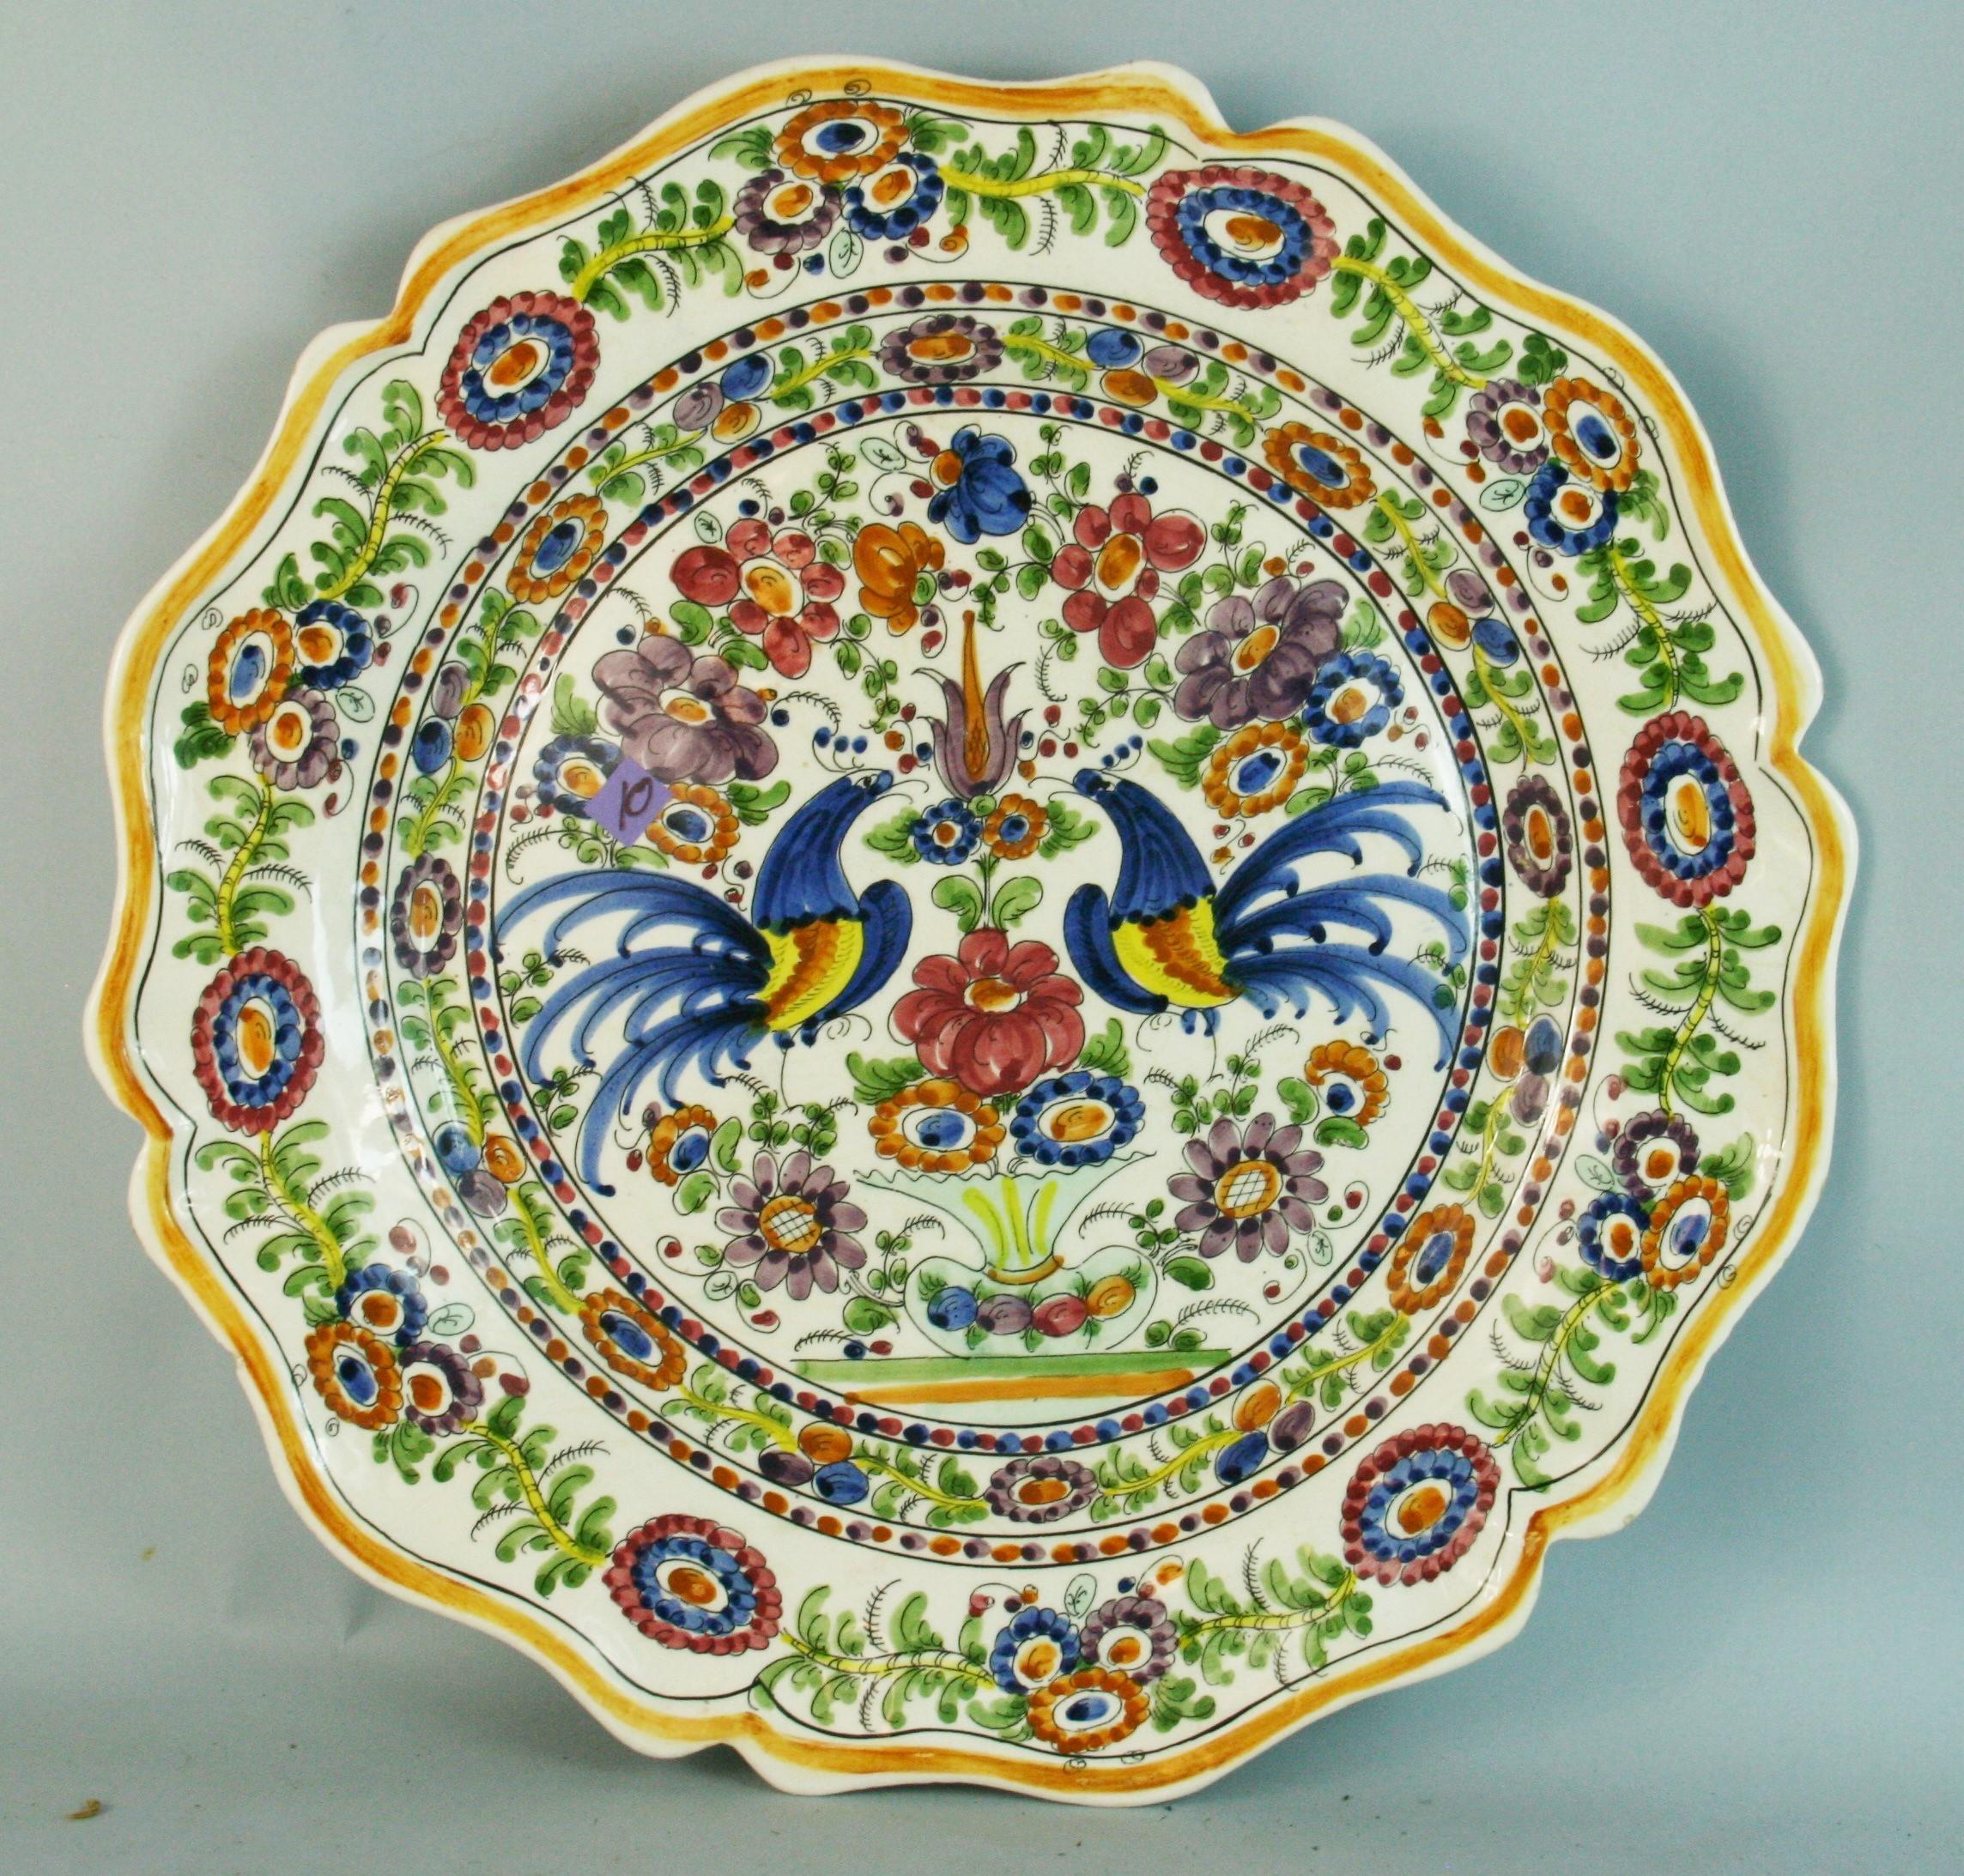 1502. Hand painted porcelain platter with colorful birds and flowers